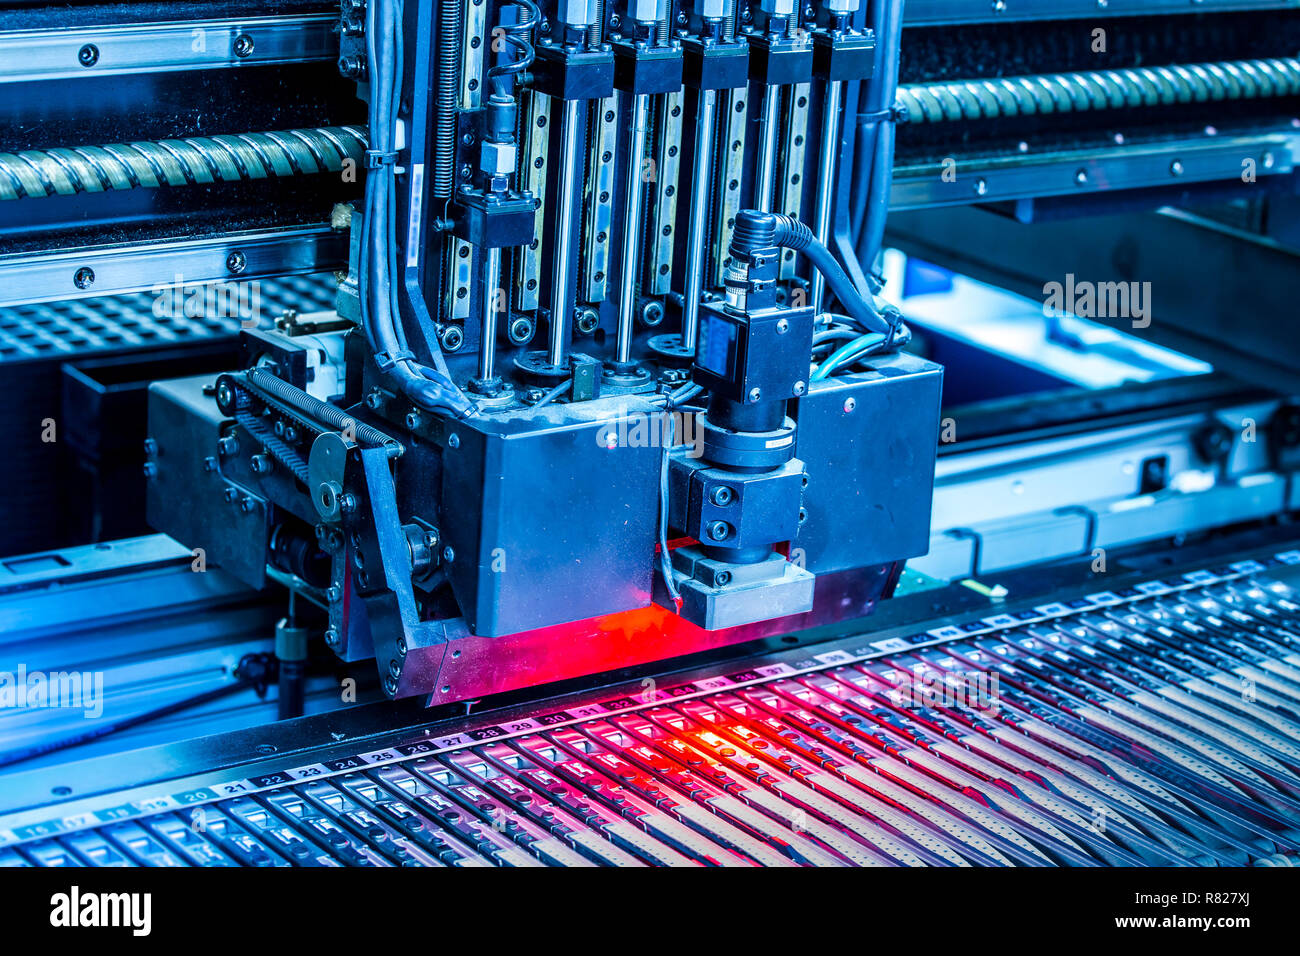 Close-up surface-mounting machine in progress. SMT (surface-mount technology) is a method for producing electronic circuits. Components are placed directly onto the surface of printed circuit boards. Stock Photo